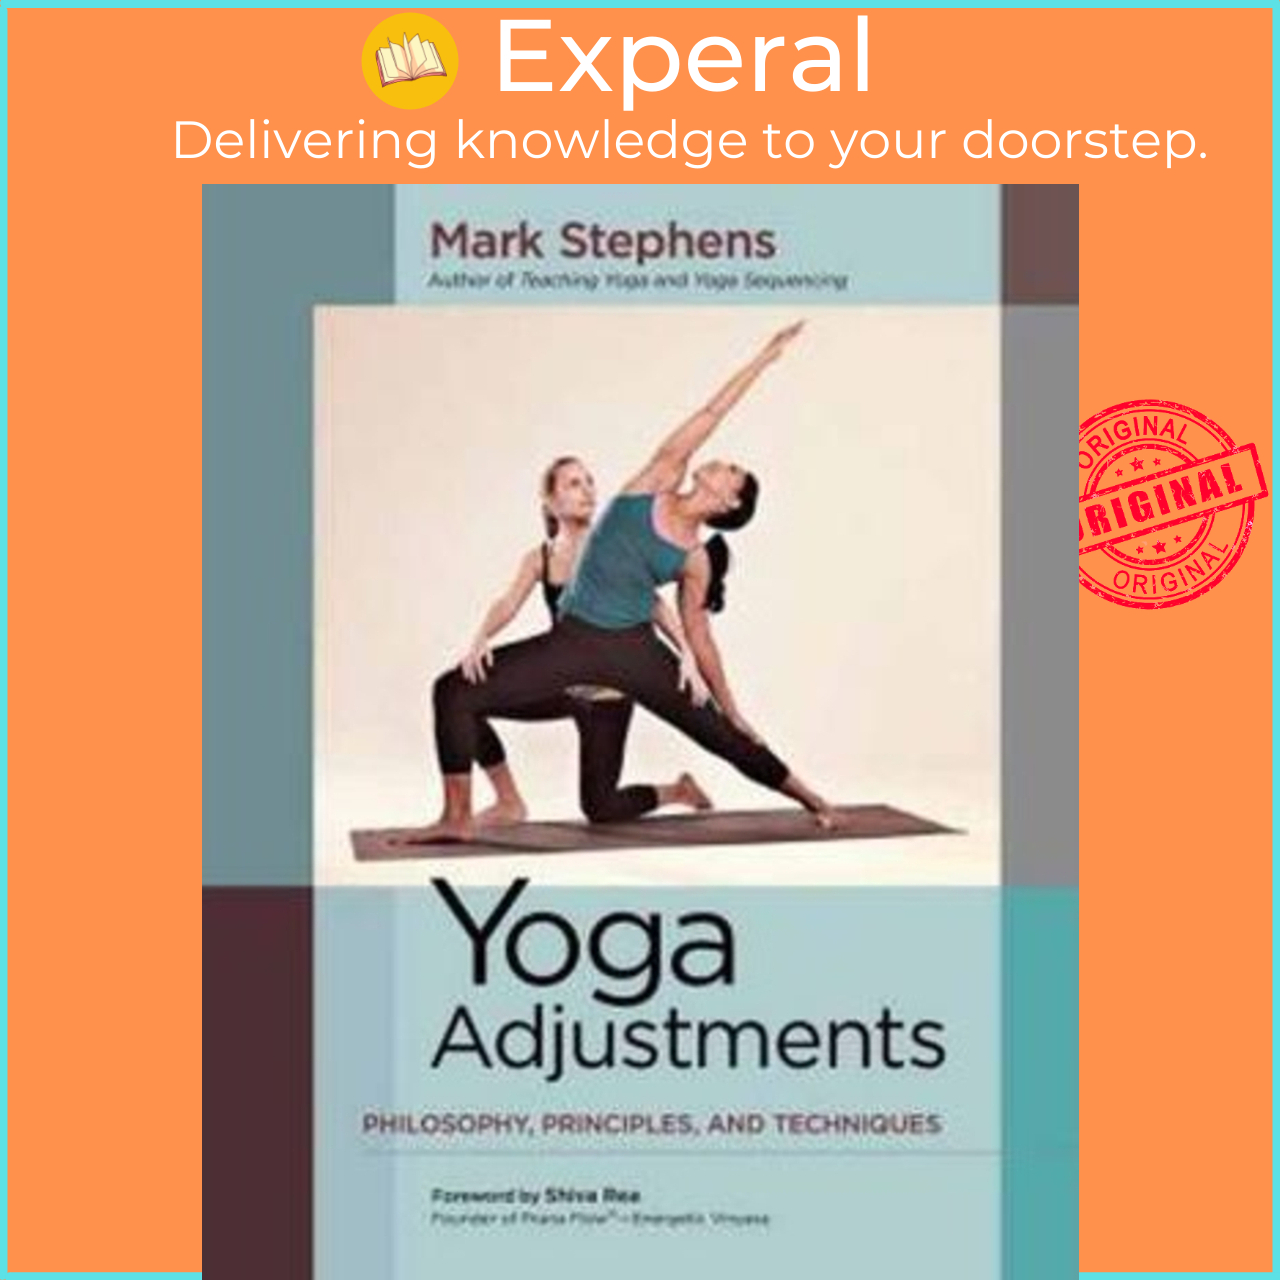 Yoga Adjustments : Philosophy, Principles, and Techniques by Mark Stephens  (US edition, paperback)